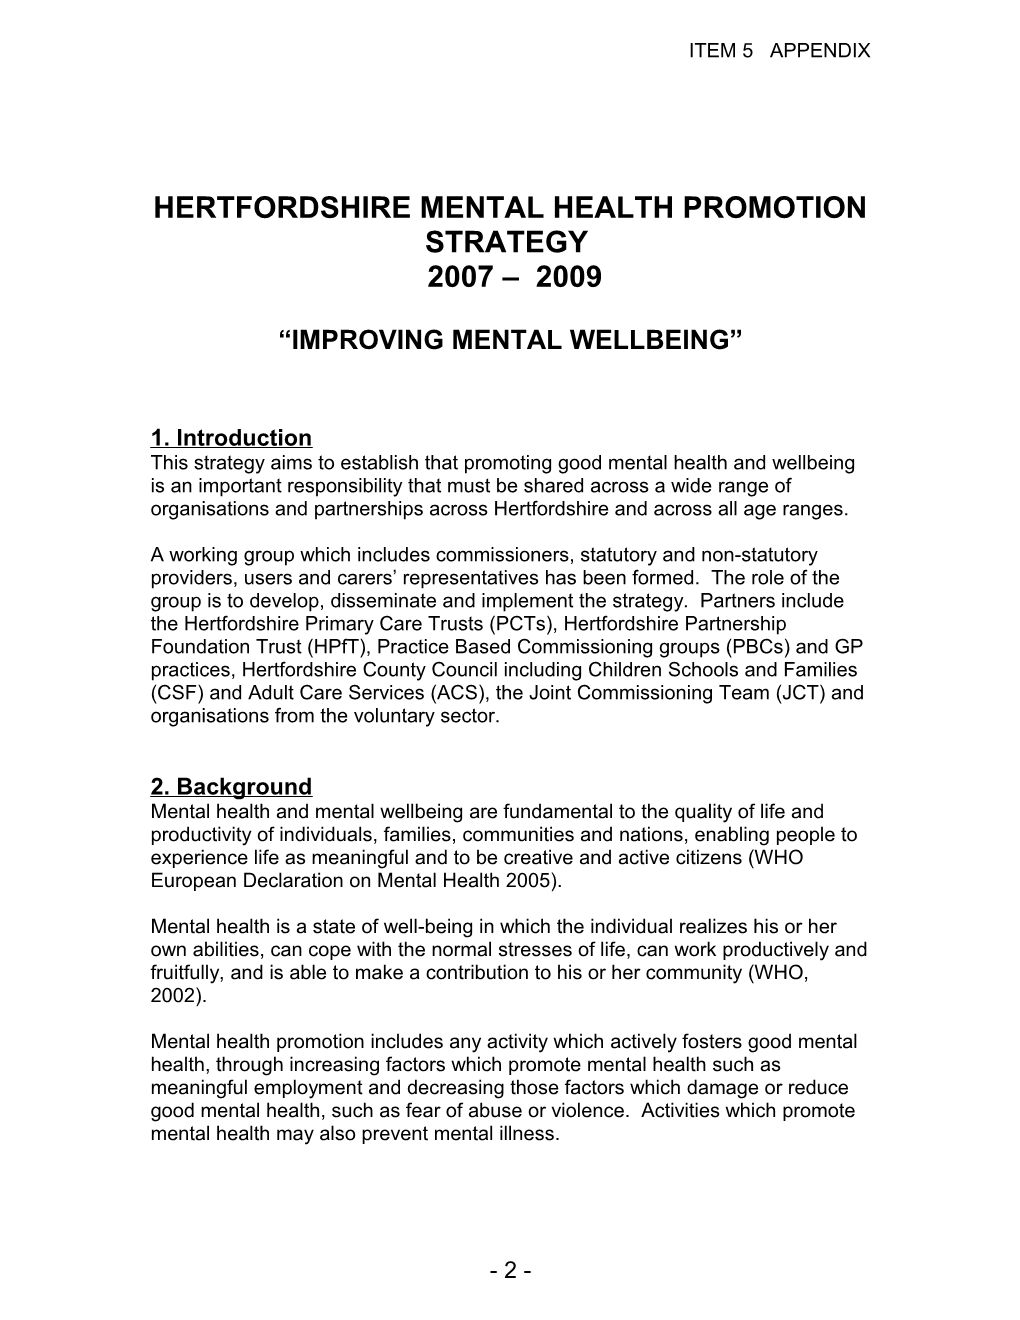 Factors Affecting Mental Health and Wellbeing .4